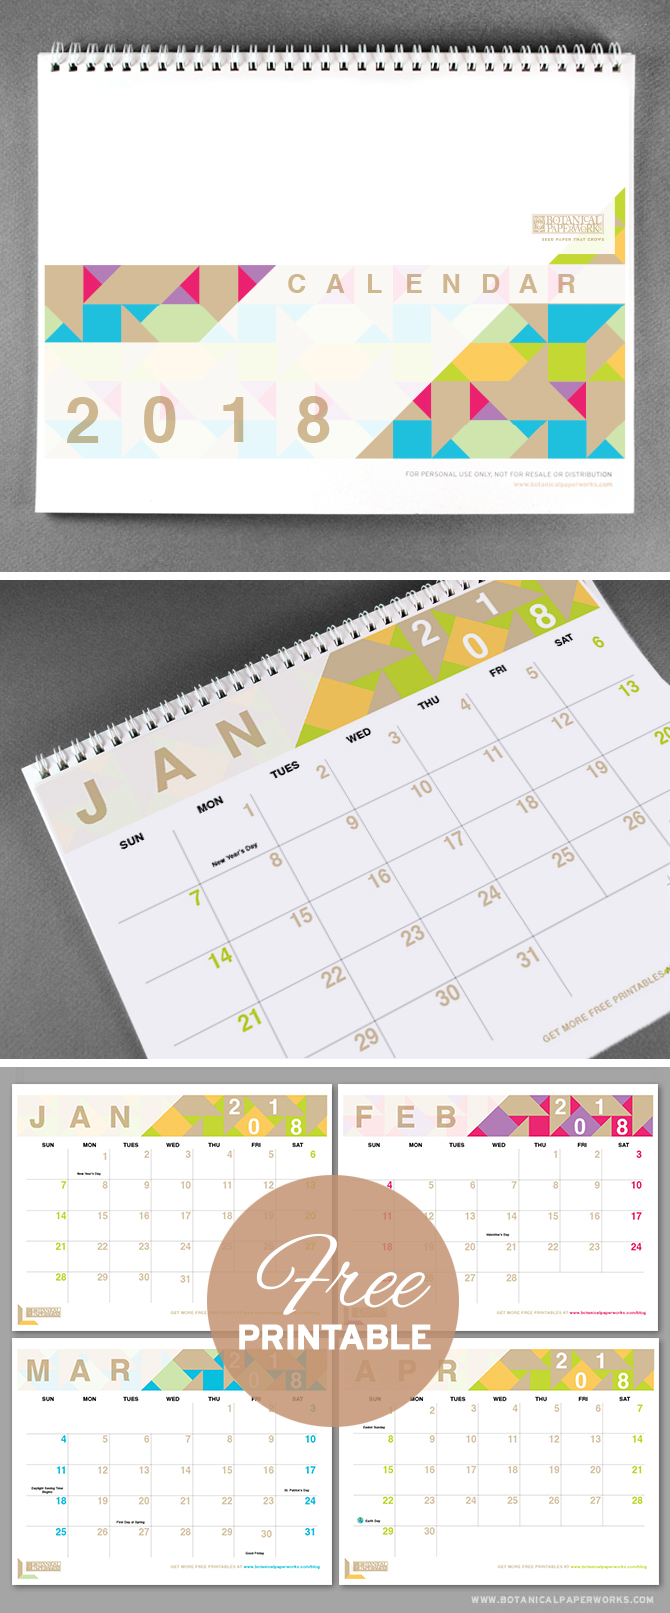 With bright pops of colour and a chic modern design, this 2018 free printable is perfect for capturing all of life’s important dates. See more designs and download your favorite 2017 calendar on our blog!